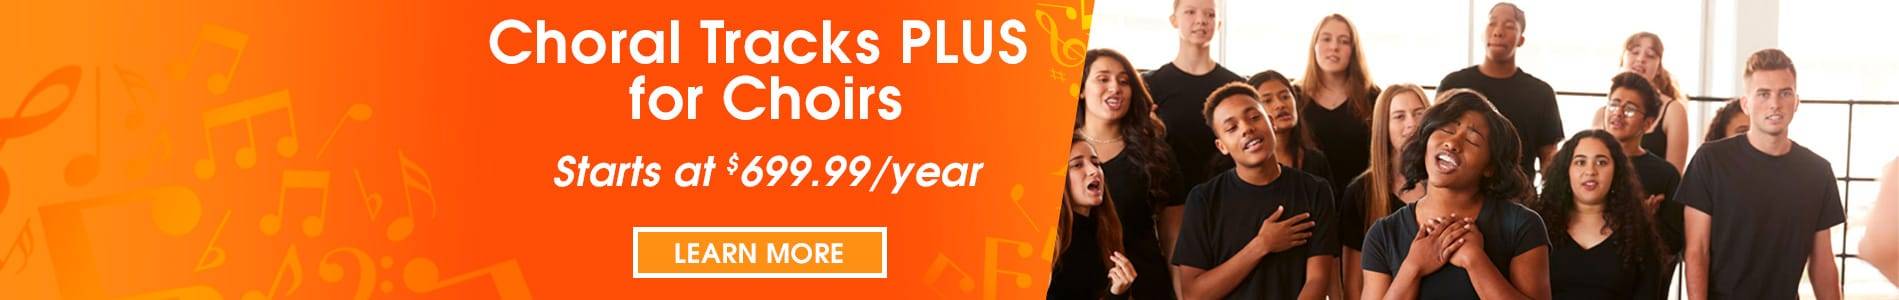 Choral Tracks PLUS Membership for Full Choirs of all sizes.